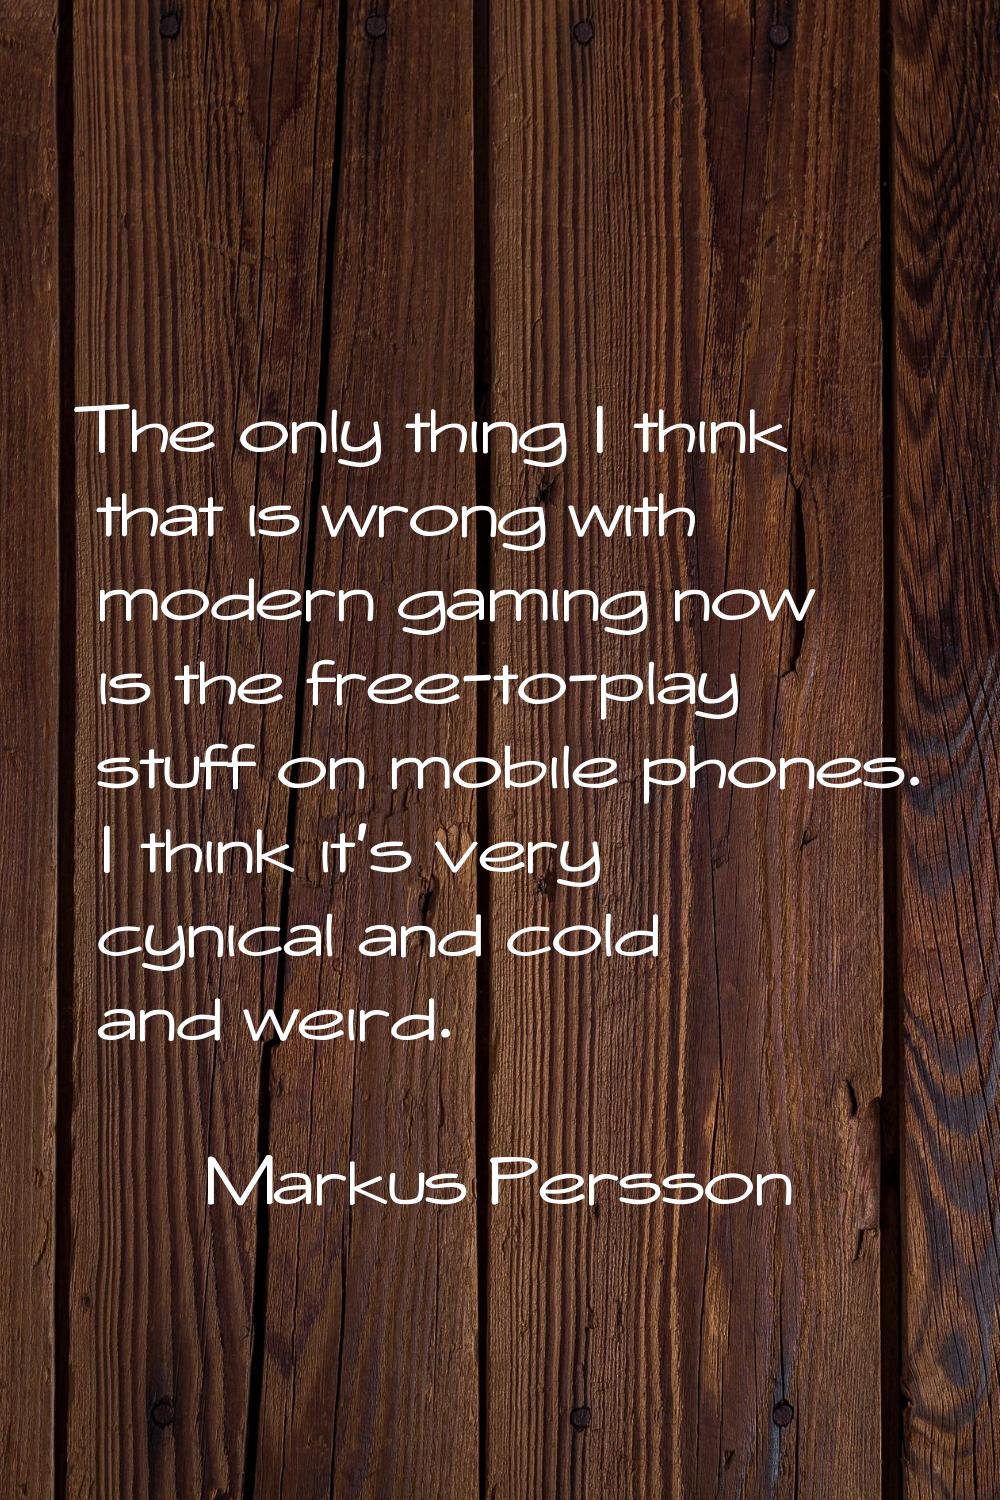 The only thing I think that is wrong with modern gaming now is the free-to-play stuff on mobile pho